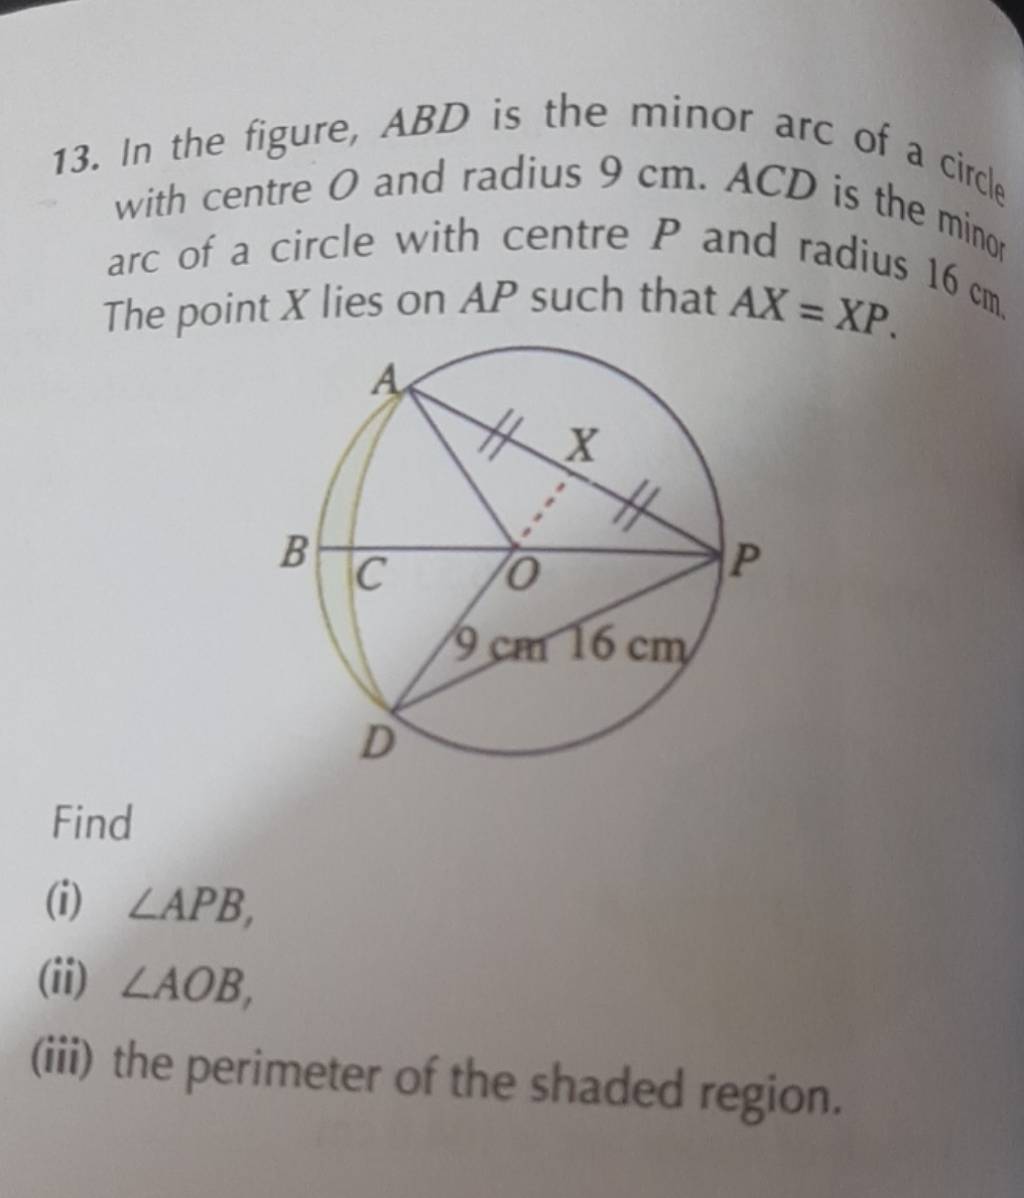 13. In the figure, ABD is the minor arc of a circle with centre O and rad..